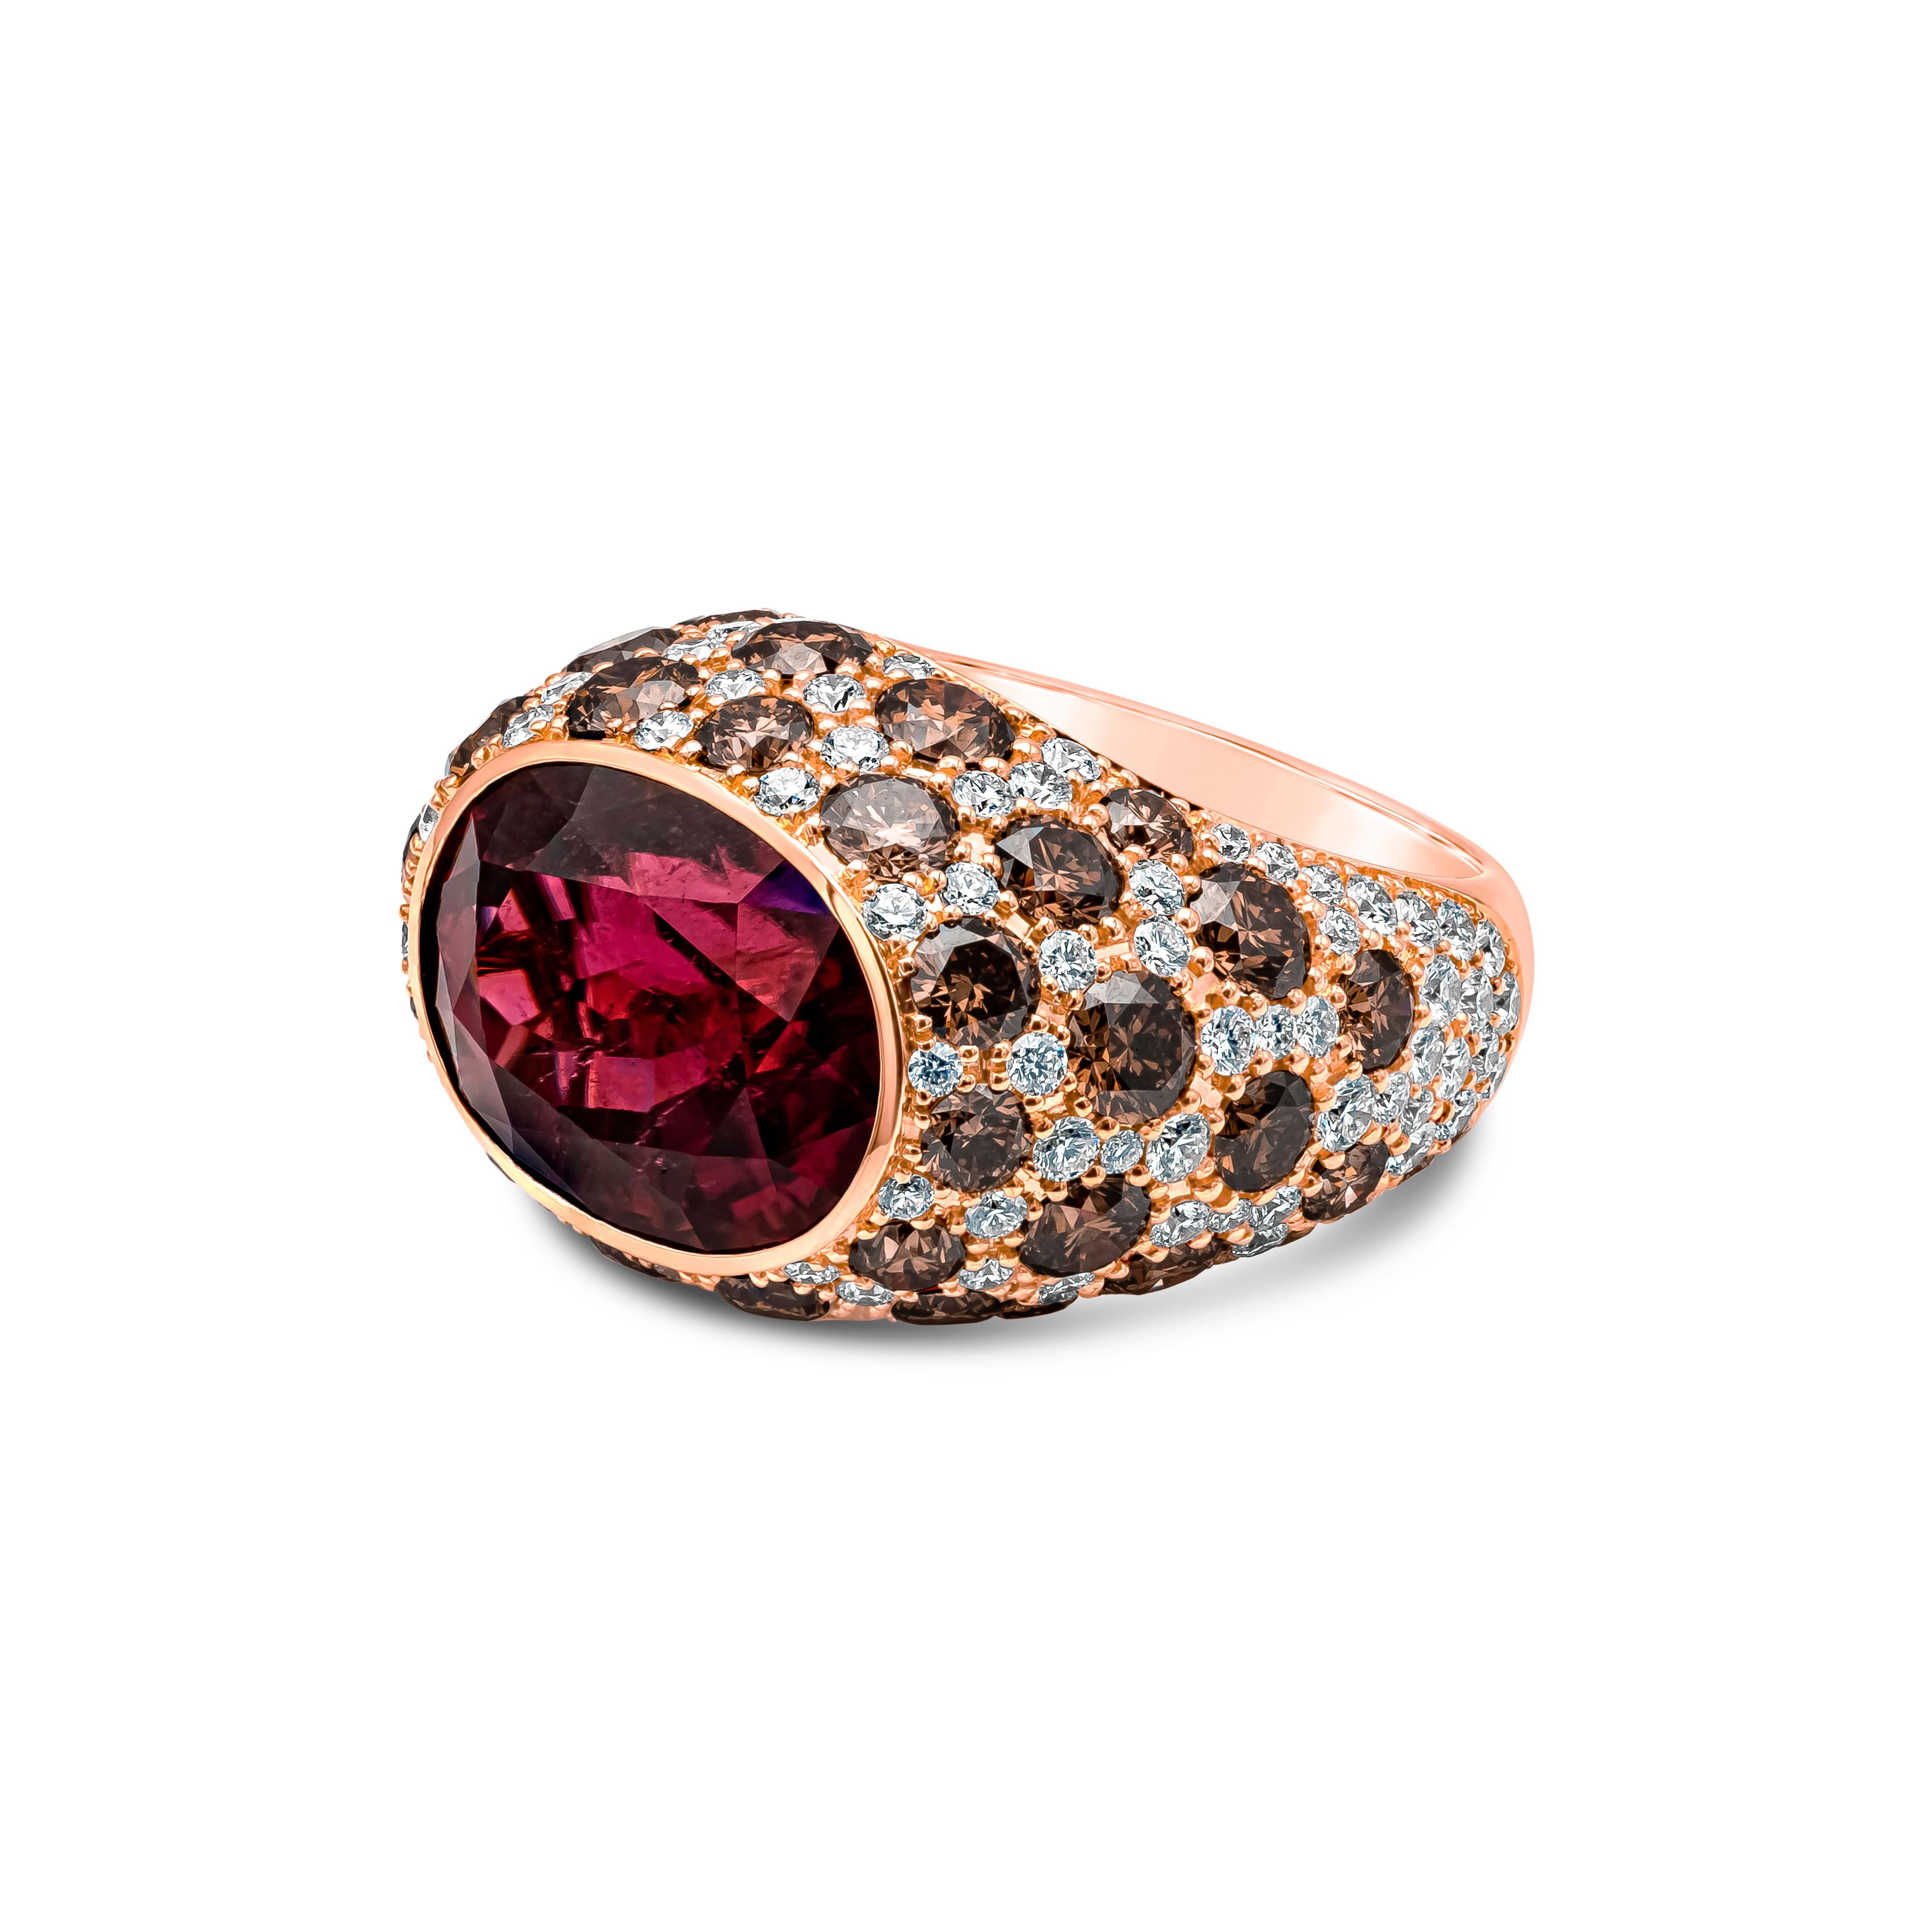 An intriguing and conversation piece of fashion ring showcasing a oval cut rubellite tourmaline weighing 11.79 carat, Bezel set. Accented with round pave set brown and white diamonds, Brown diamonds weighs 5.62 carats, VS in Clarity, and White